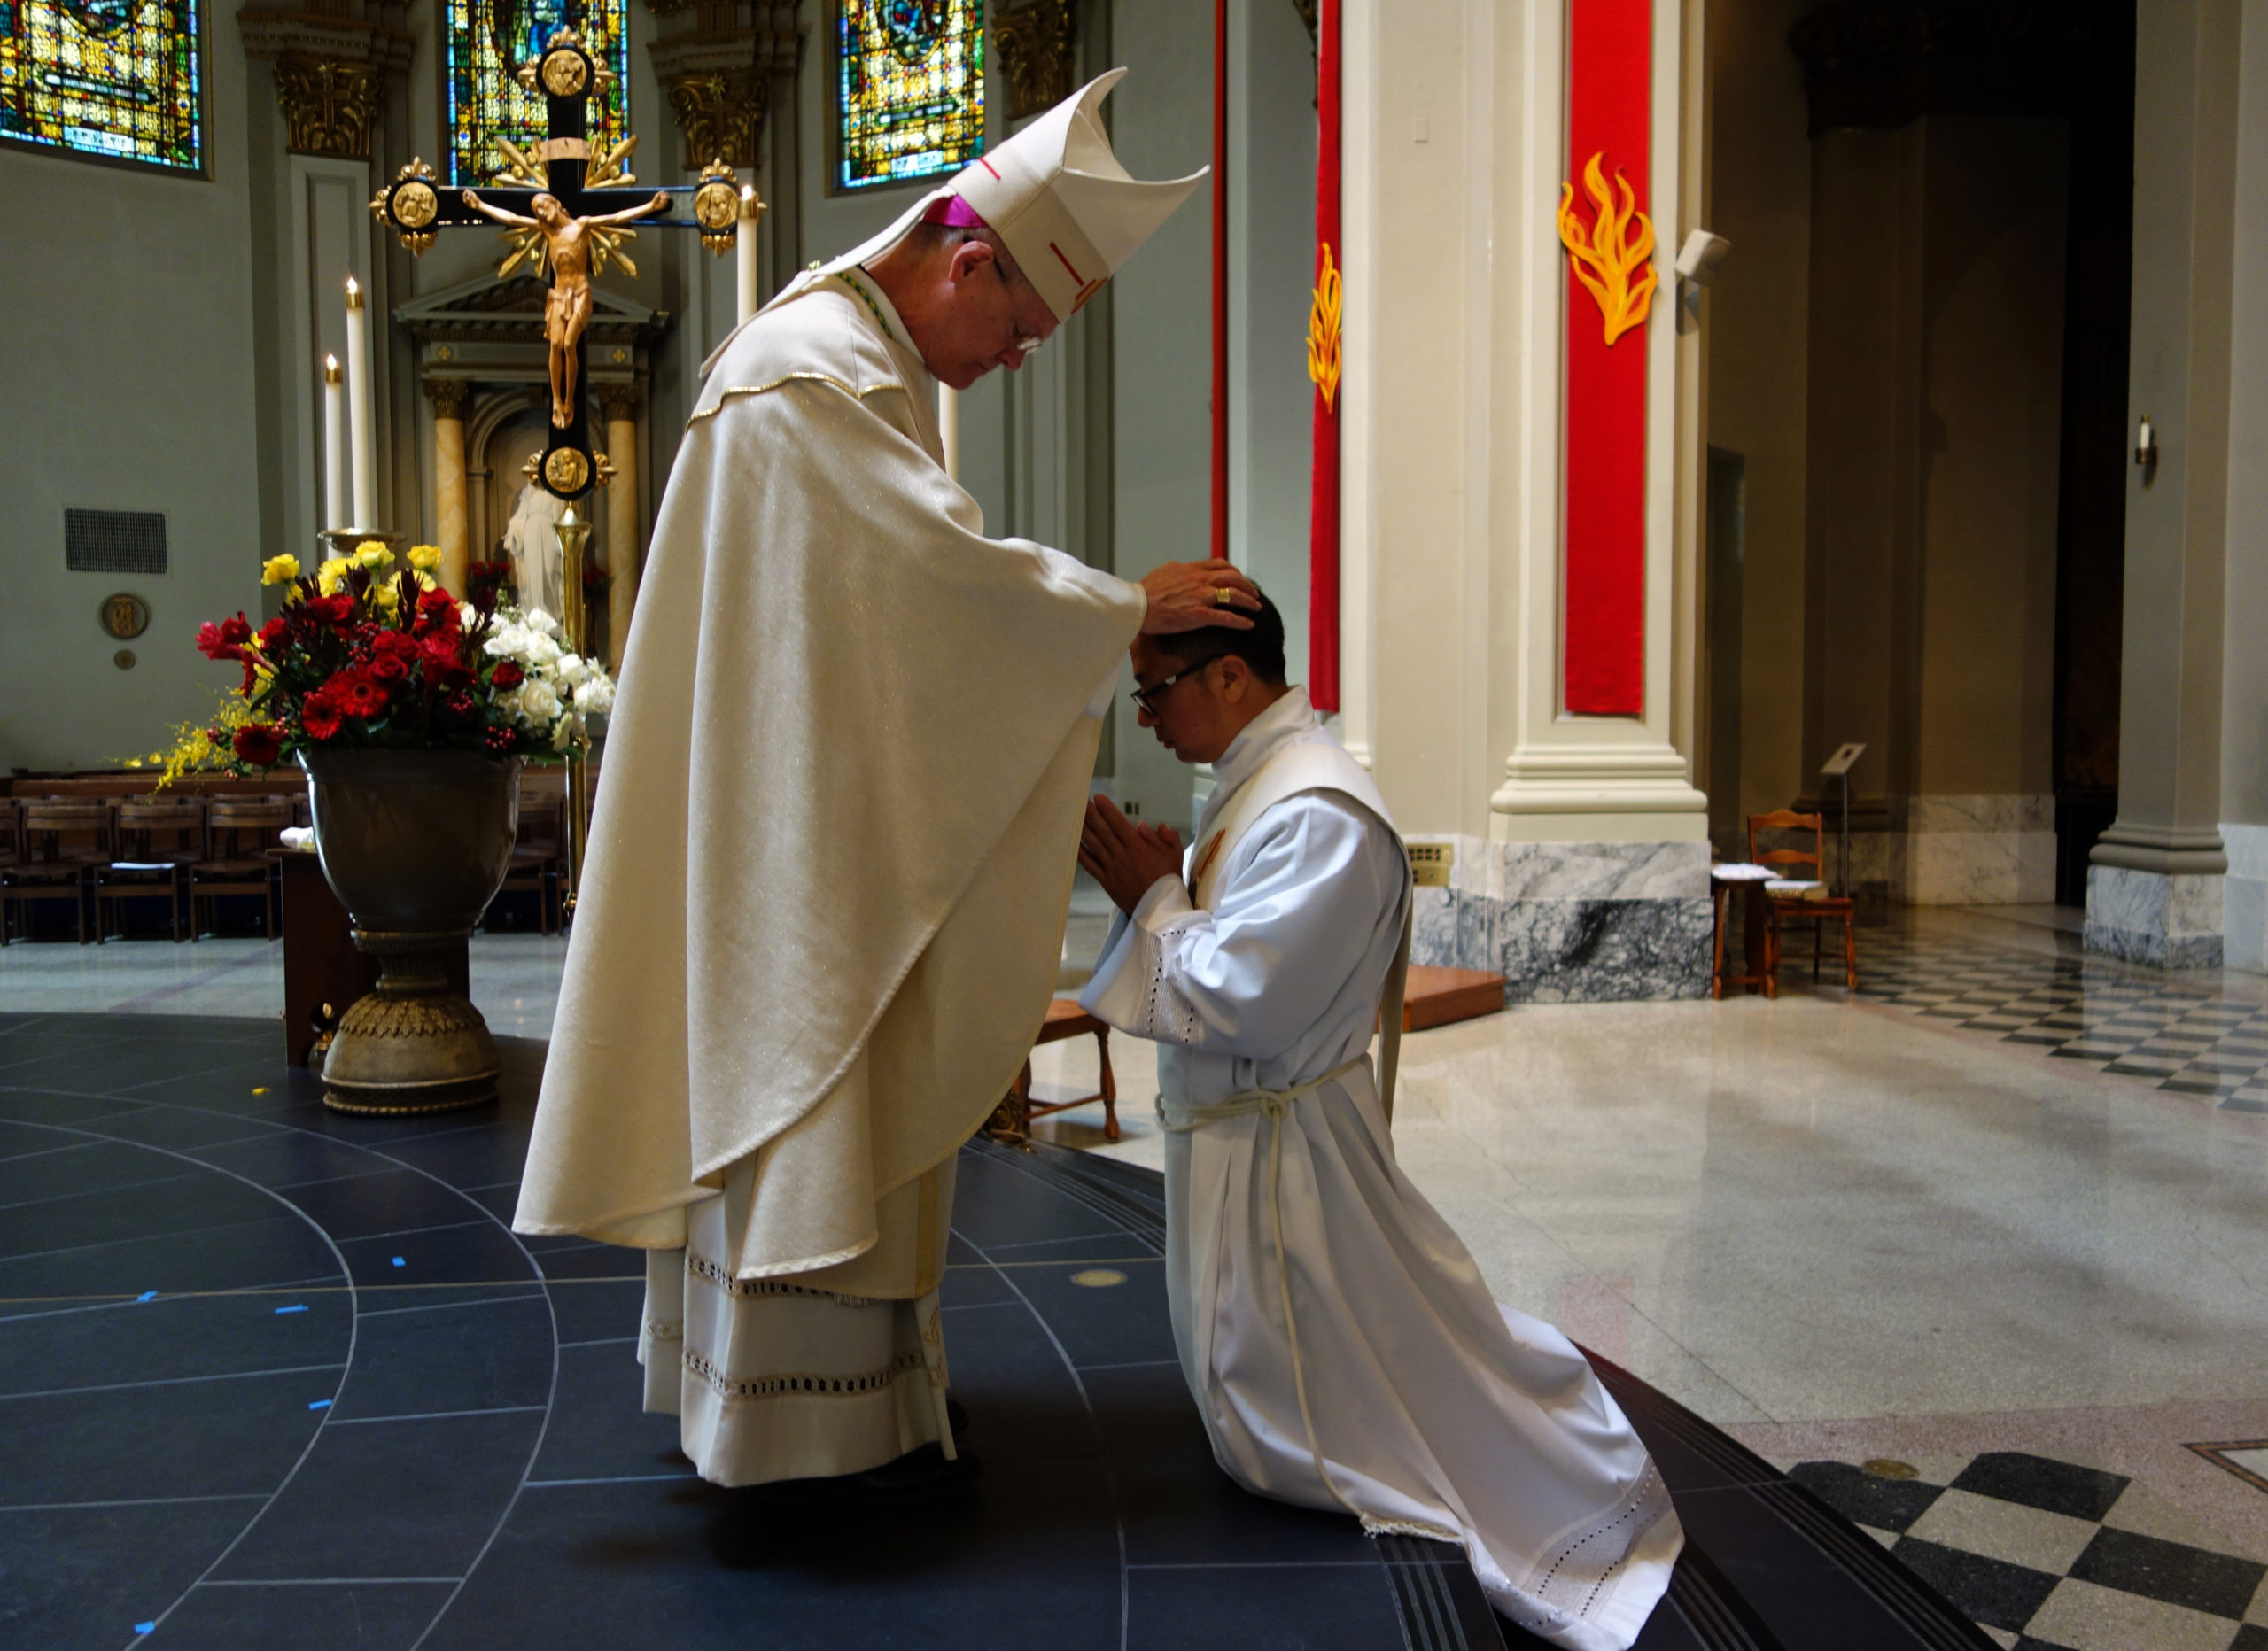 The laying on of hands by Archbishop Paul D. Etienne at the Ordination Rite of Thomas Tran, June 6, 2020 at St. James Cathedral, Seattle. Photo by M. Laughlin